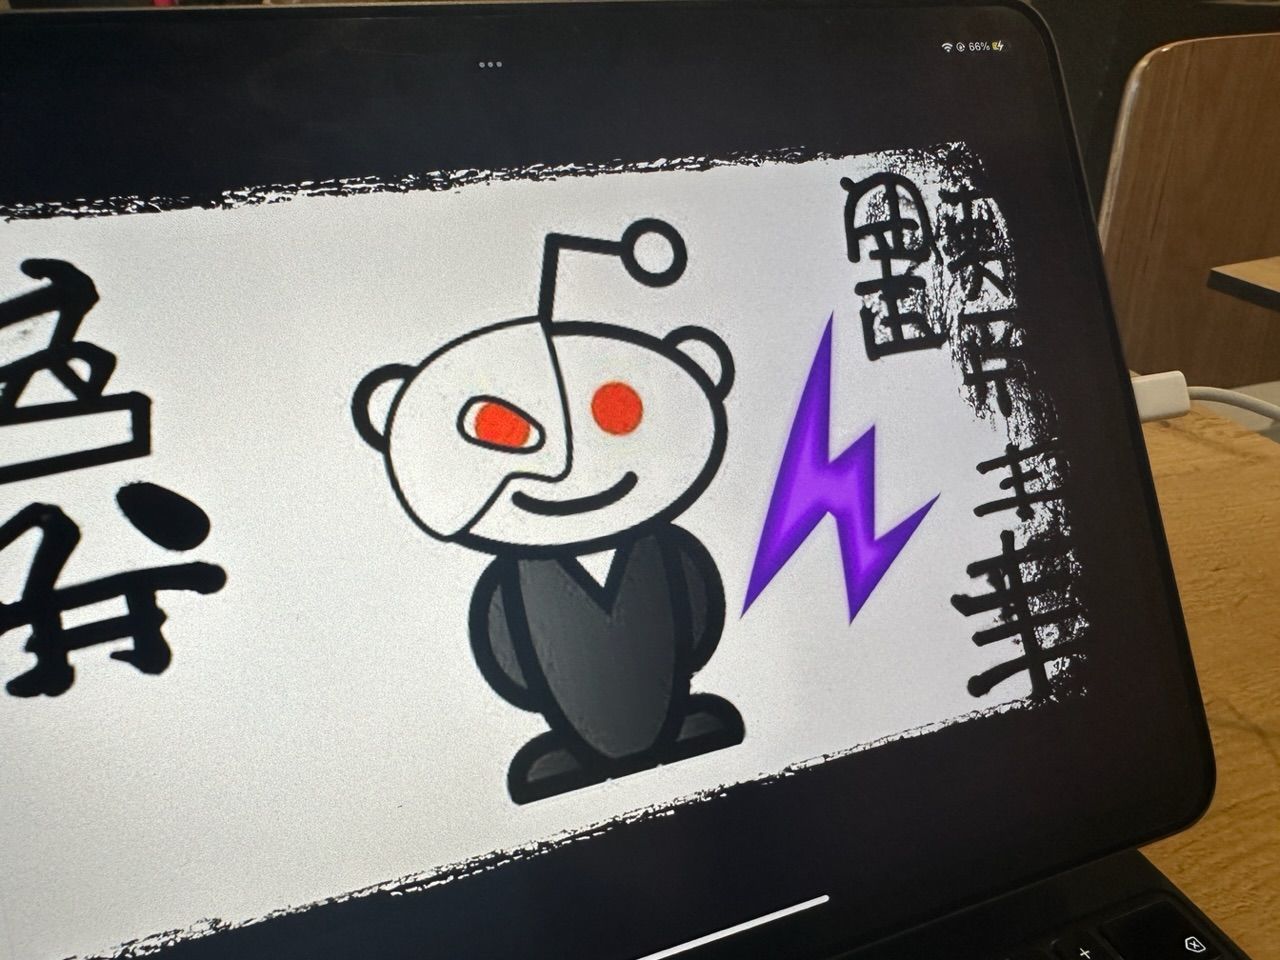 View of an altered Reddit logo.